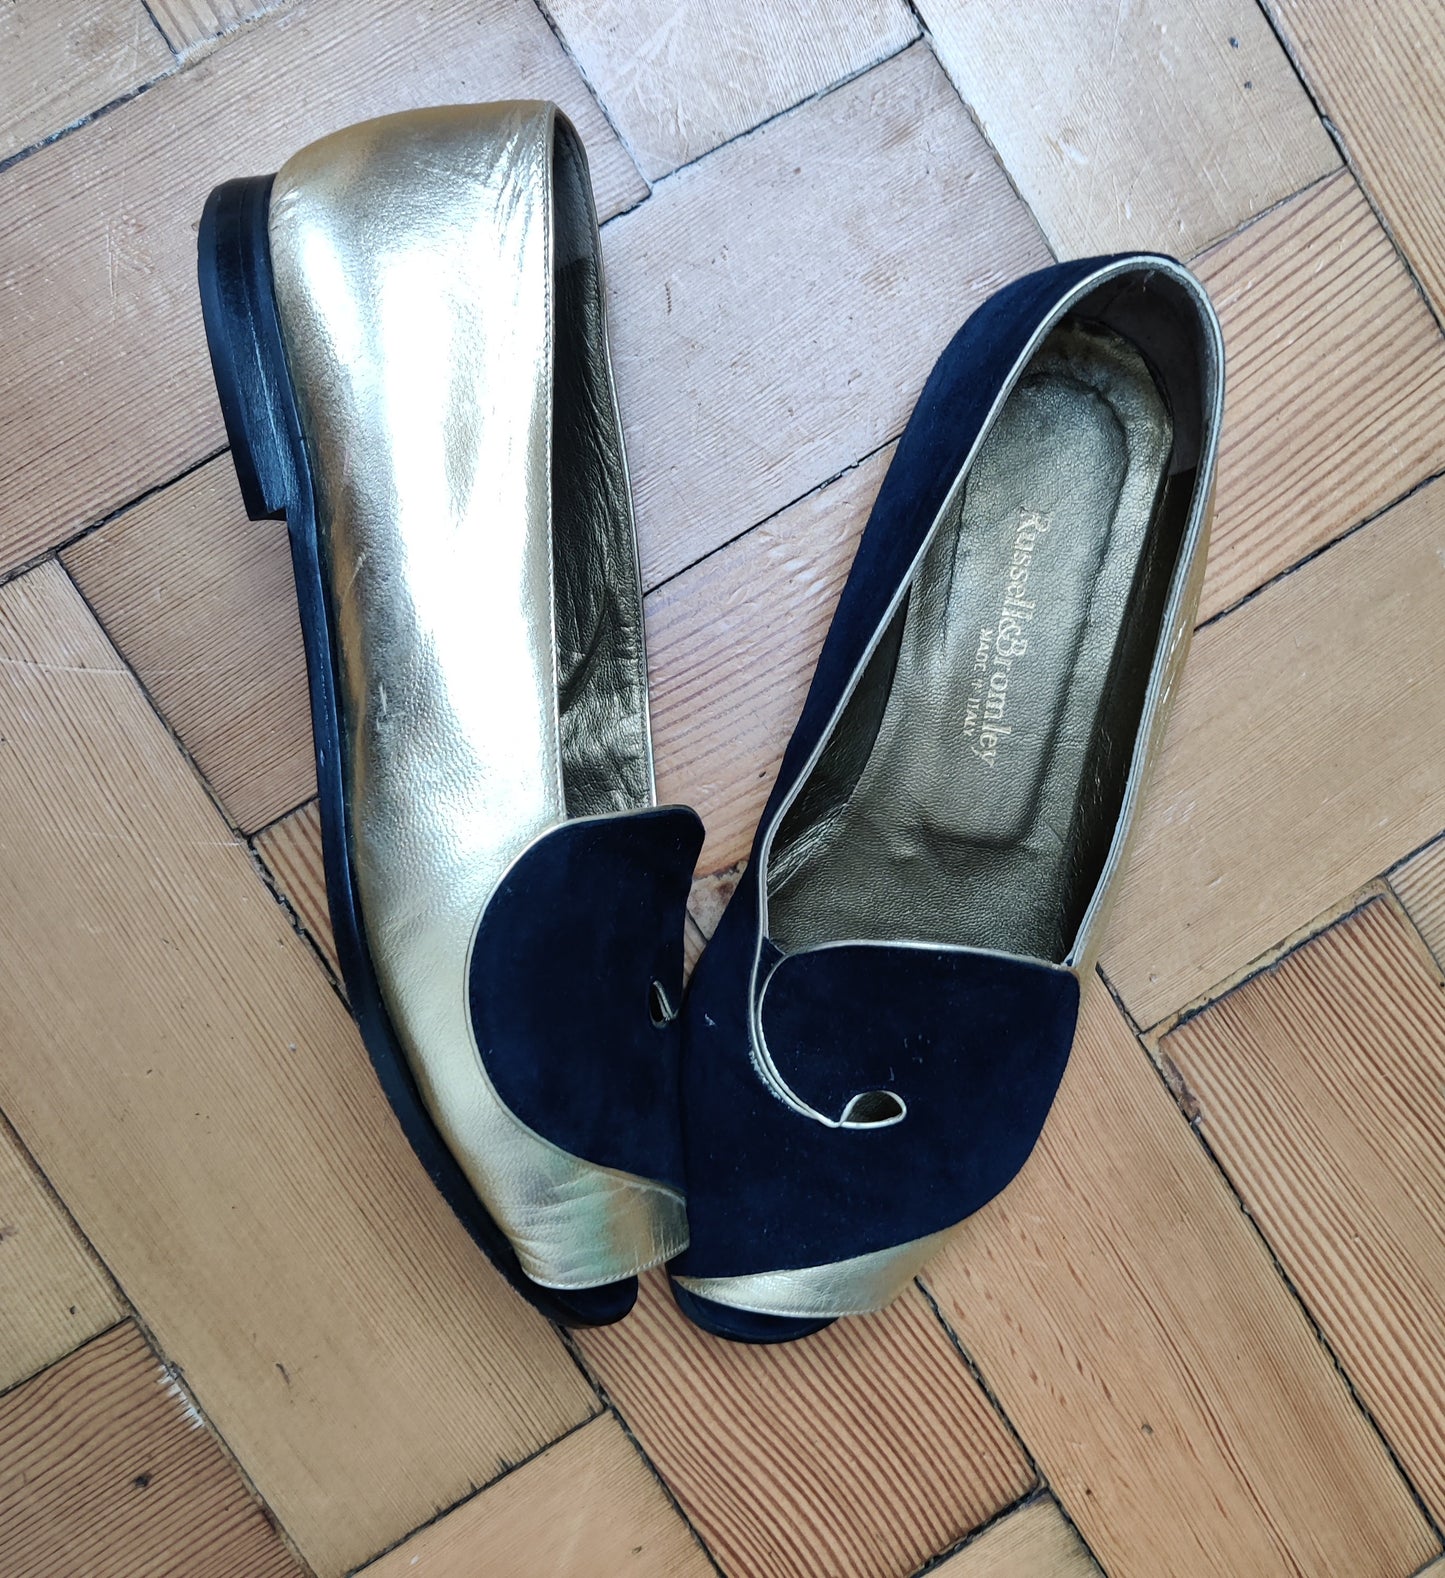 Swirl design pumps by Russell % Bromley